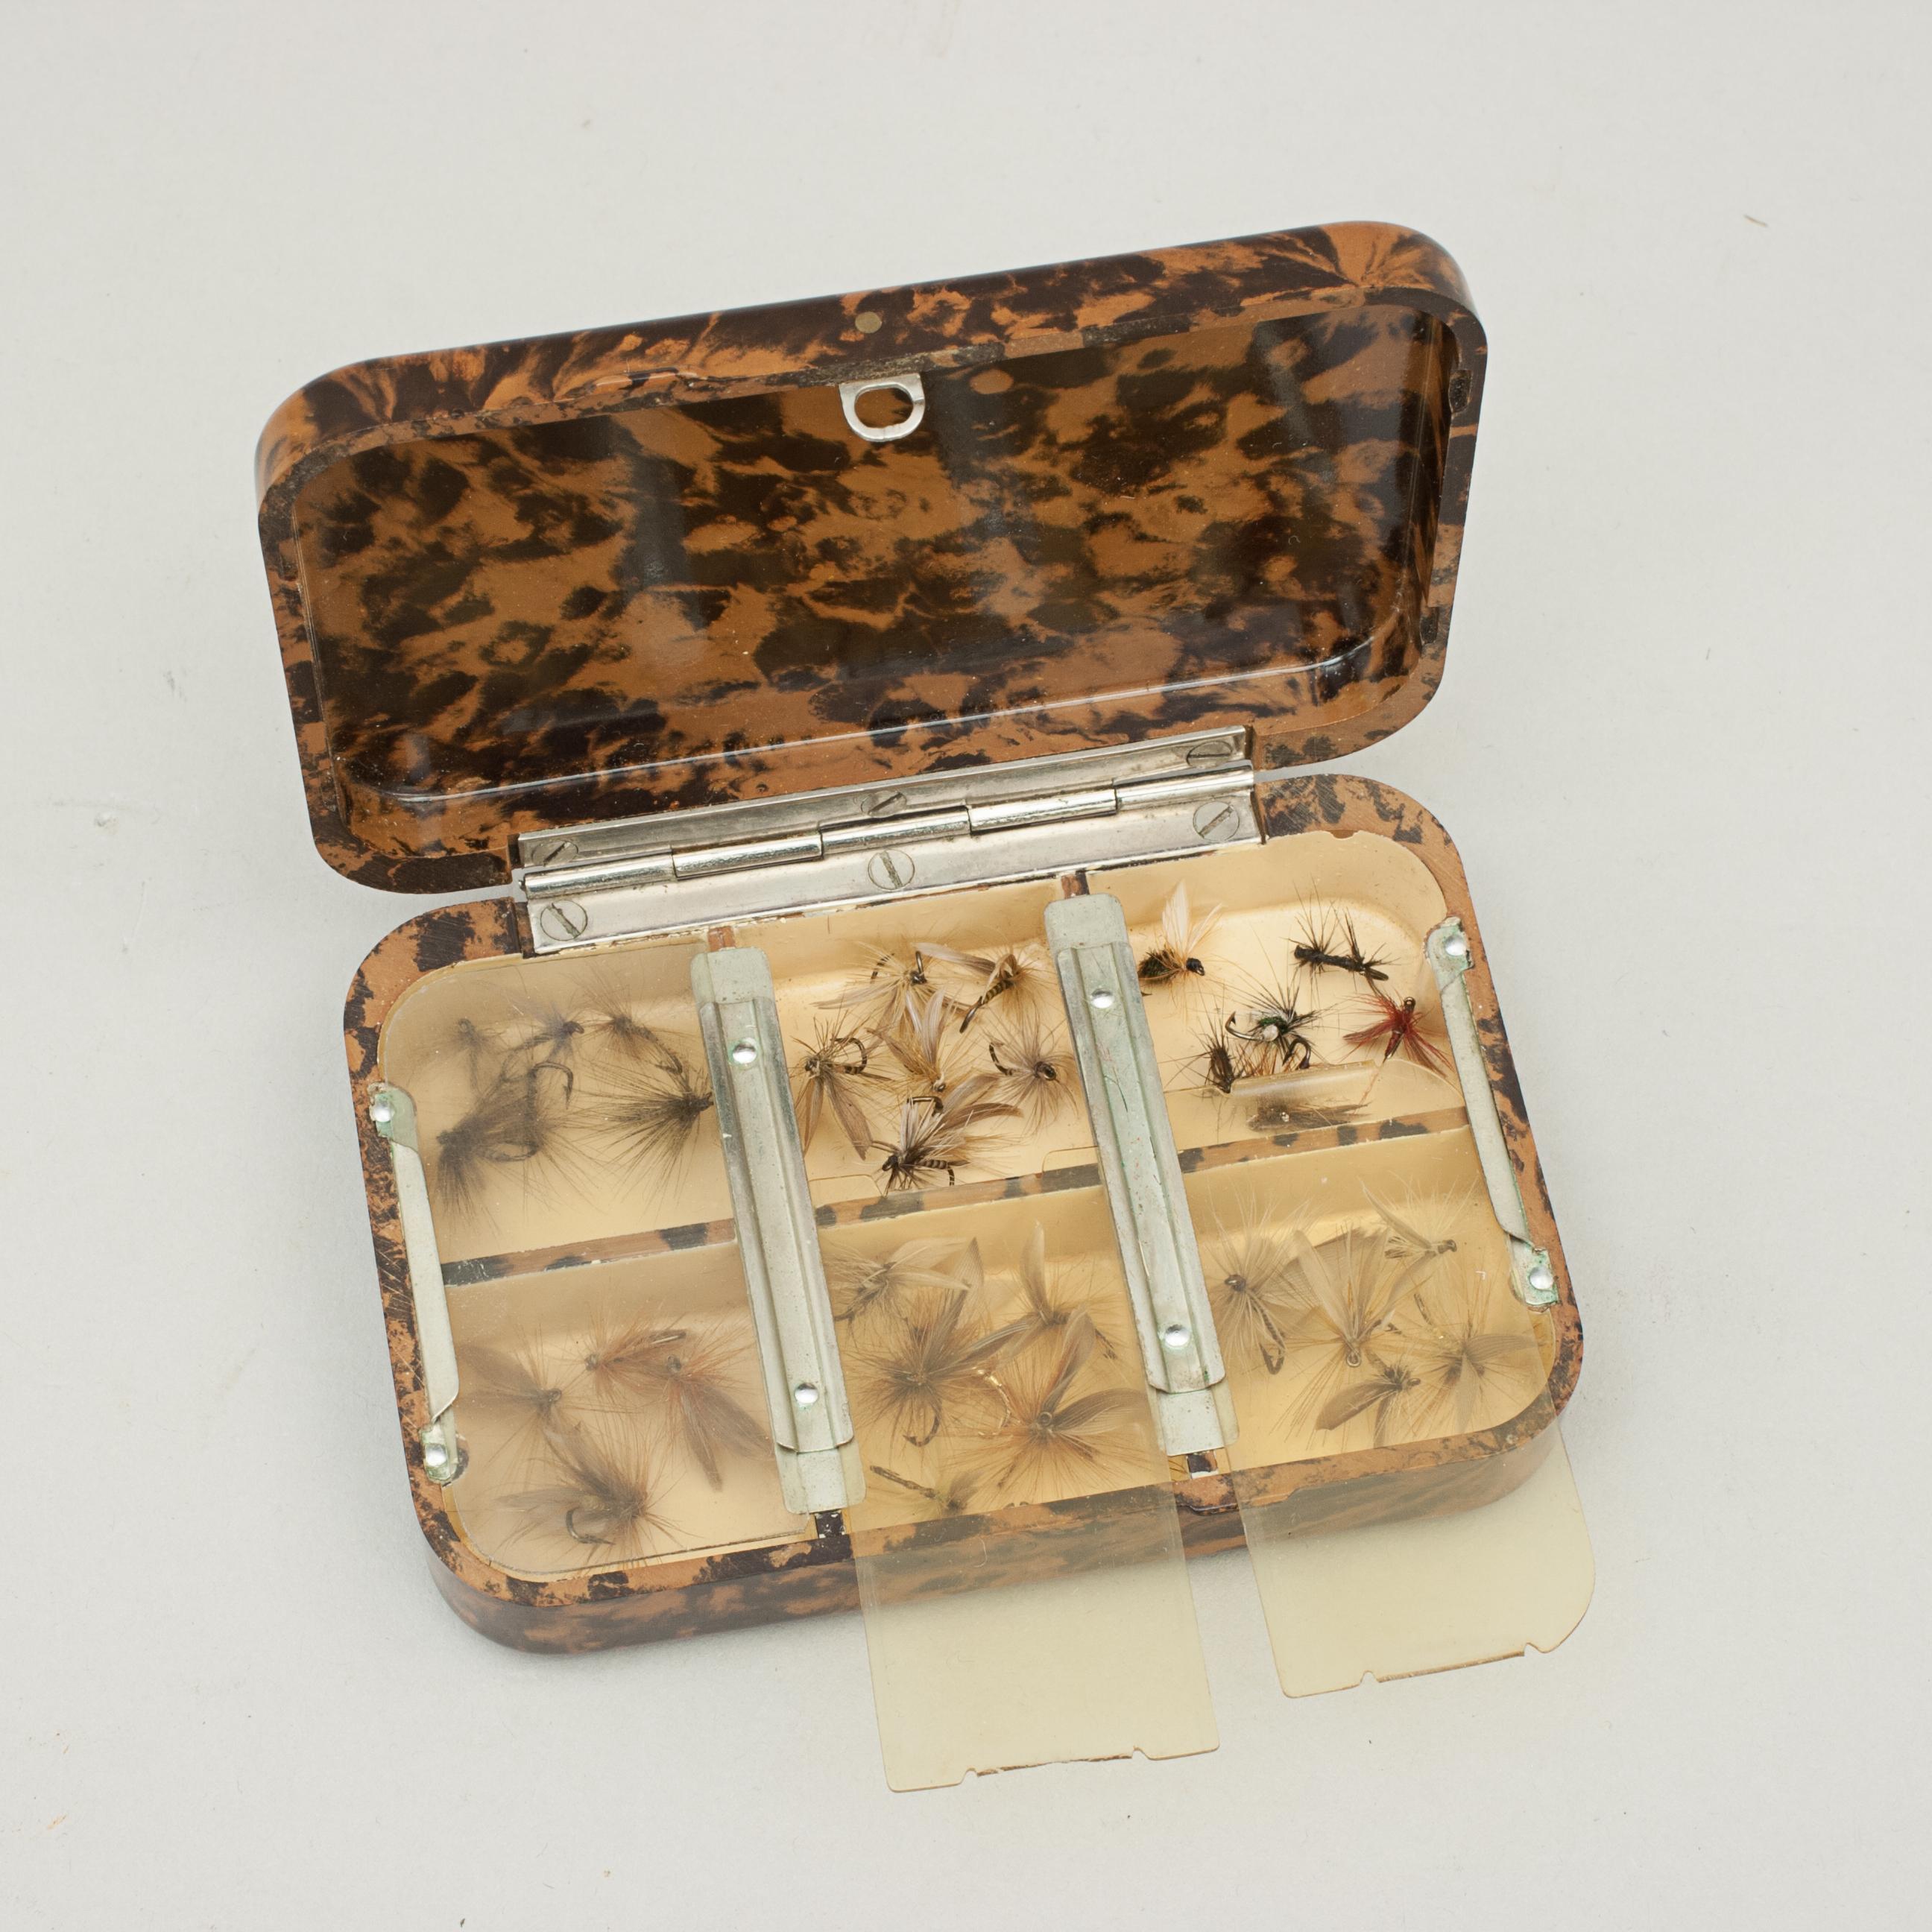 Vintage Small Hardy Bros. Neroda Trout Fly Box.
A good Neroda fly box made from bakelite with a brown tortoiseshell finish manufactured by Hardy's of Alnwick. The lid and bottom are embossed with 'Hardy BROS. LTD. MAKERS ENGLAND' and holding a